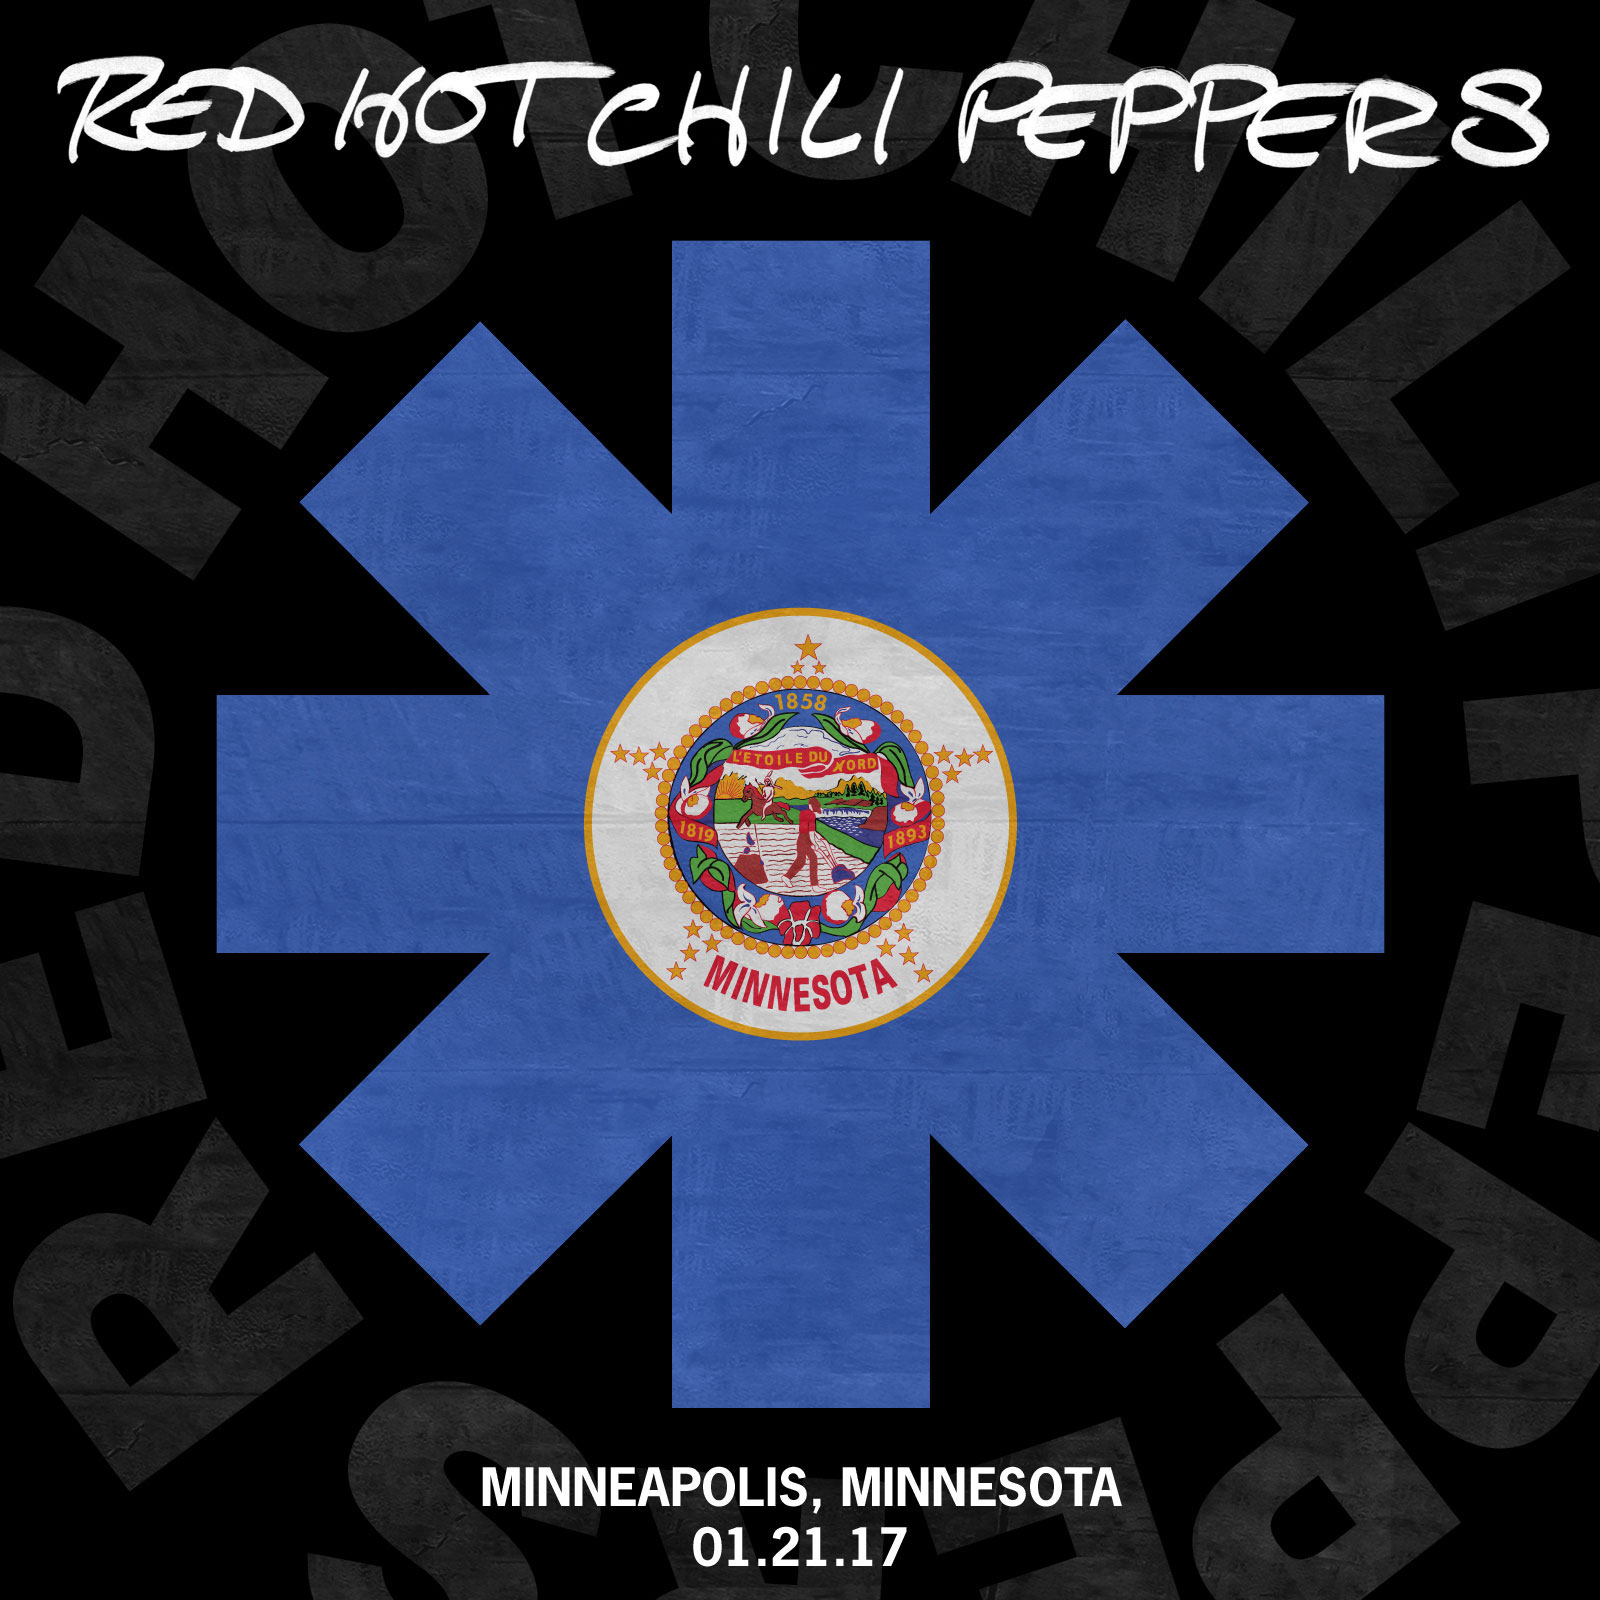 Chili peppers mp3. Scar Tissue Red hot Chili Peppers. RHCP scar Tissue. Патч Red hot Chili Peppers. RHCP Californication.